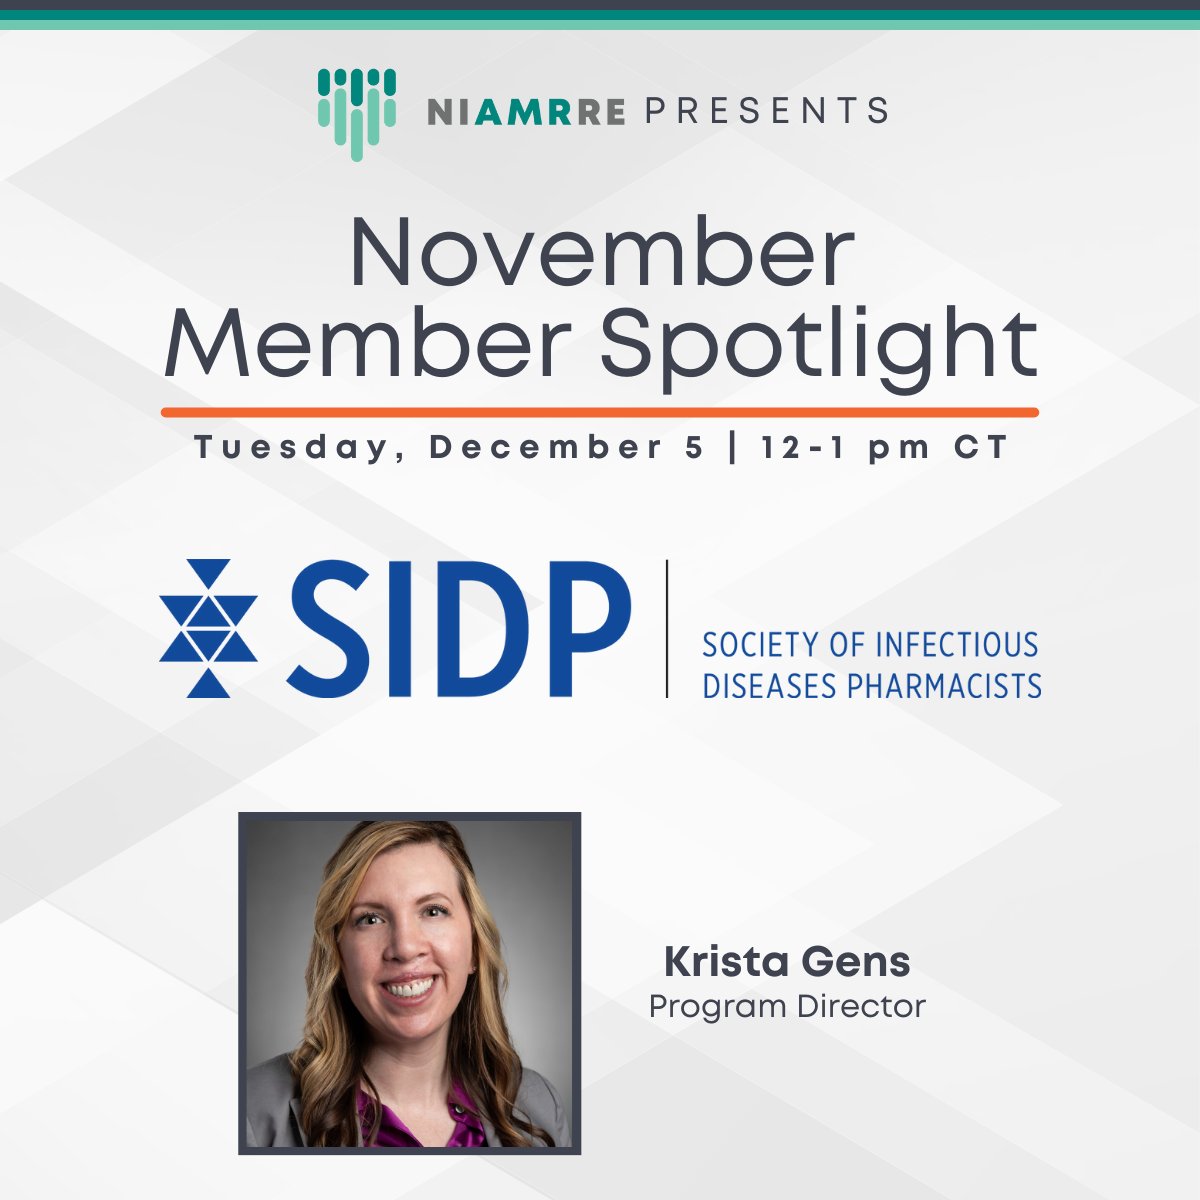 Don't forget! Tomorrow is the December Member Spotlight with Krista Gens of the Society of Infectious Diseases Pharmacists. Register Here: rb.gy/f34h6i